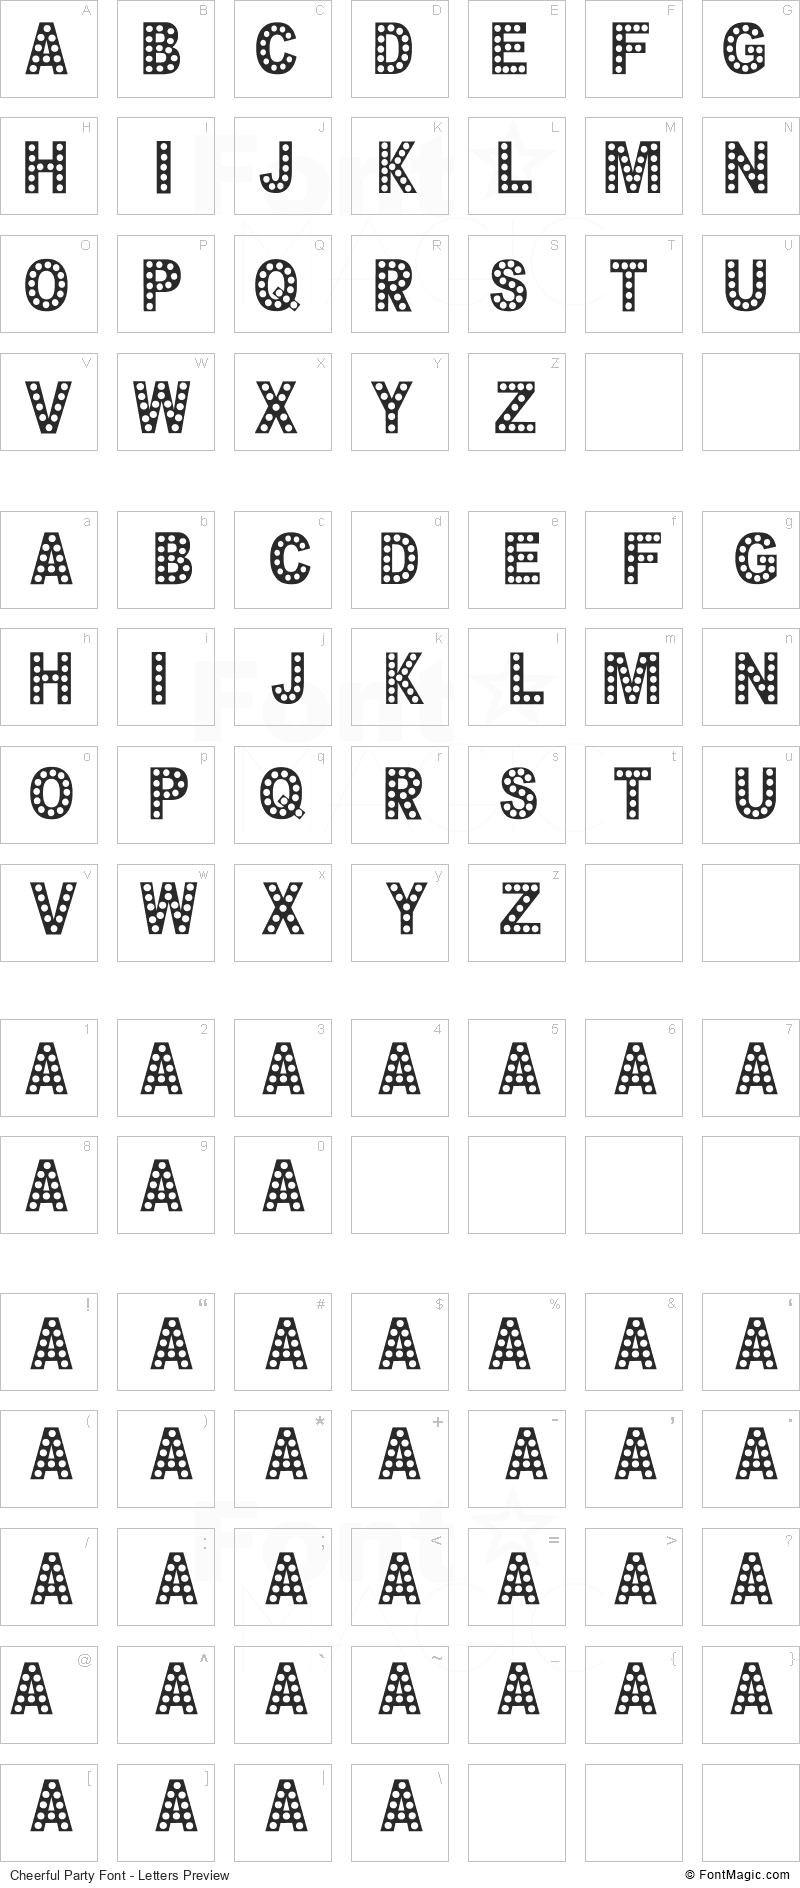 Cheerful Party Font - All Latters Preview Chart